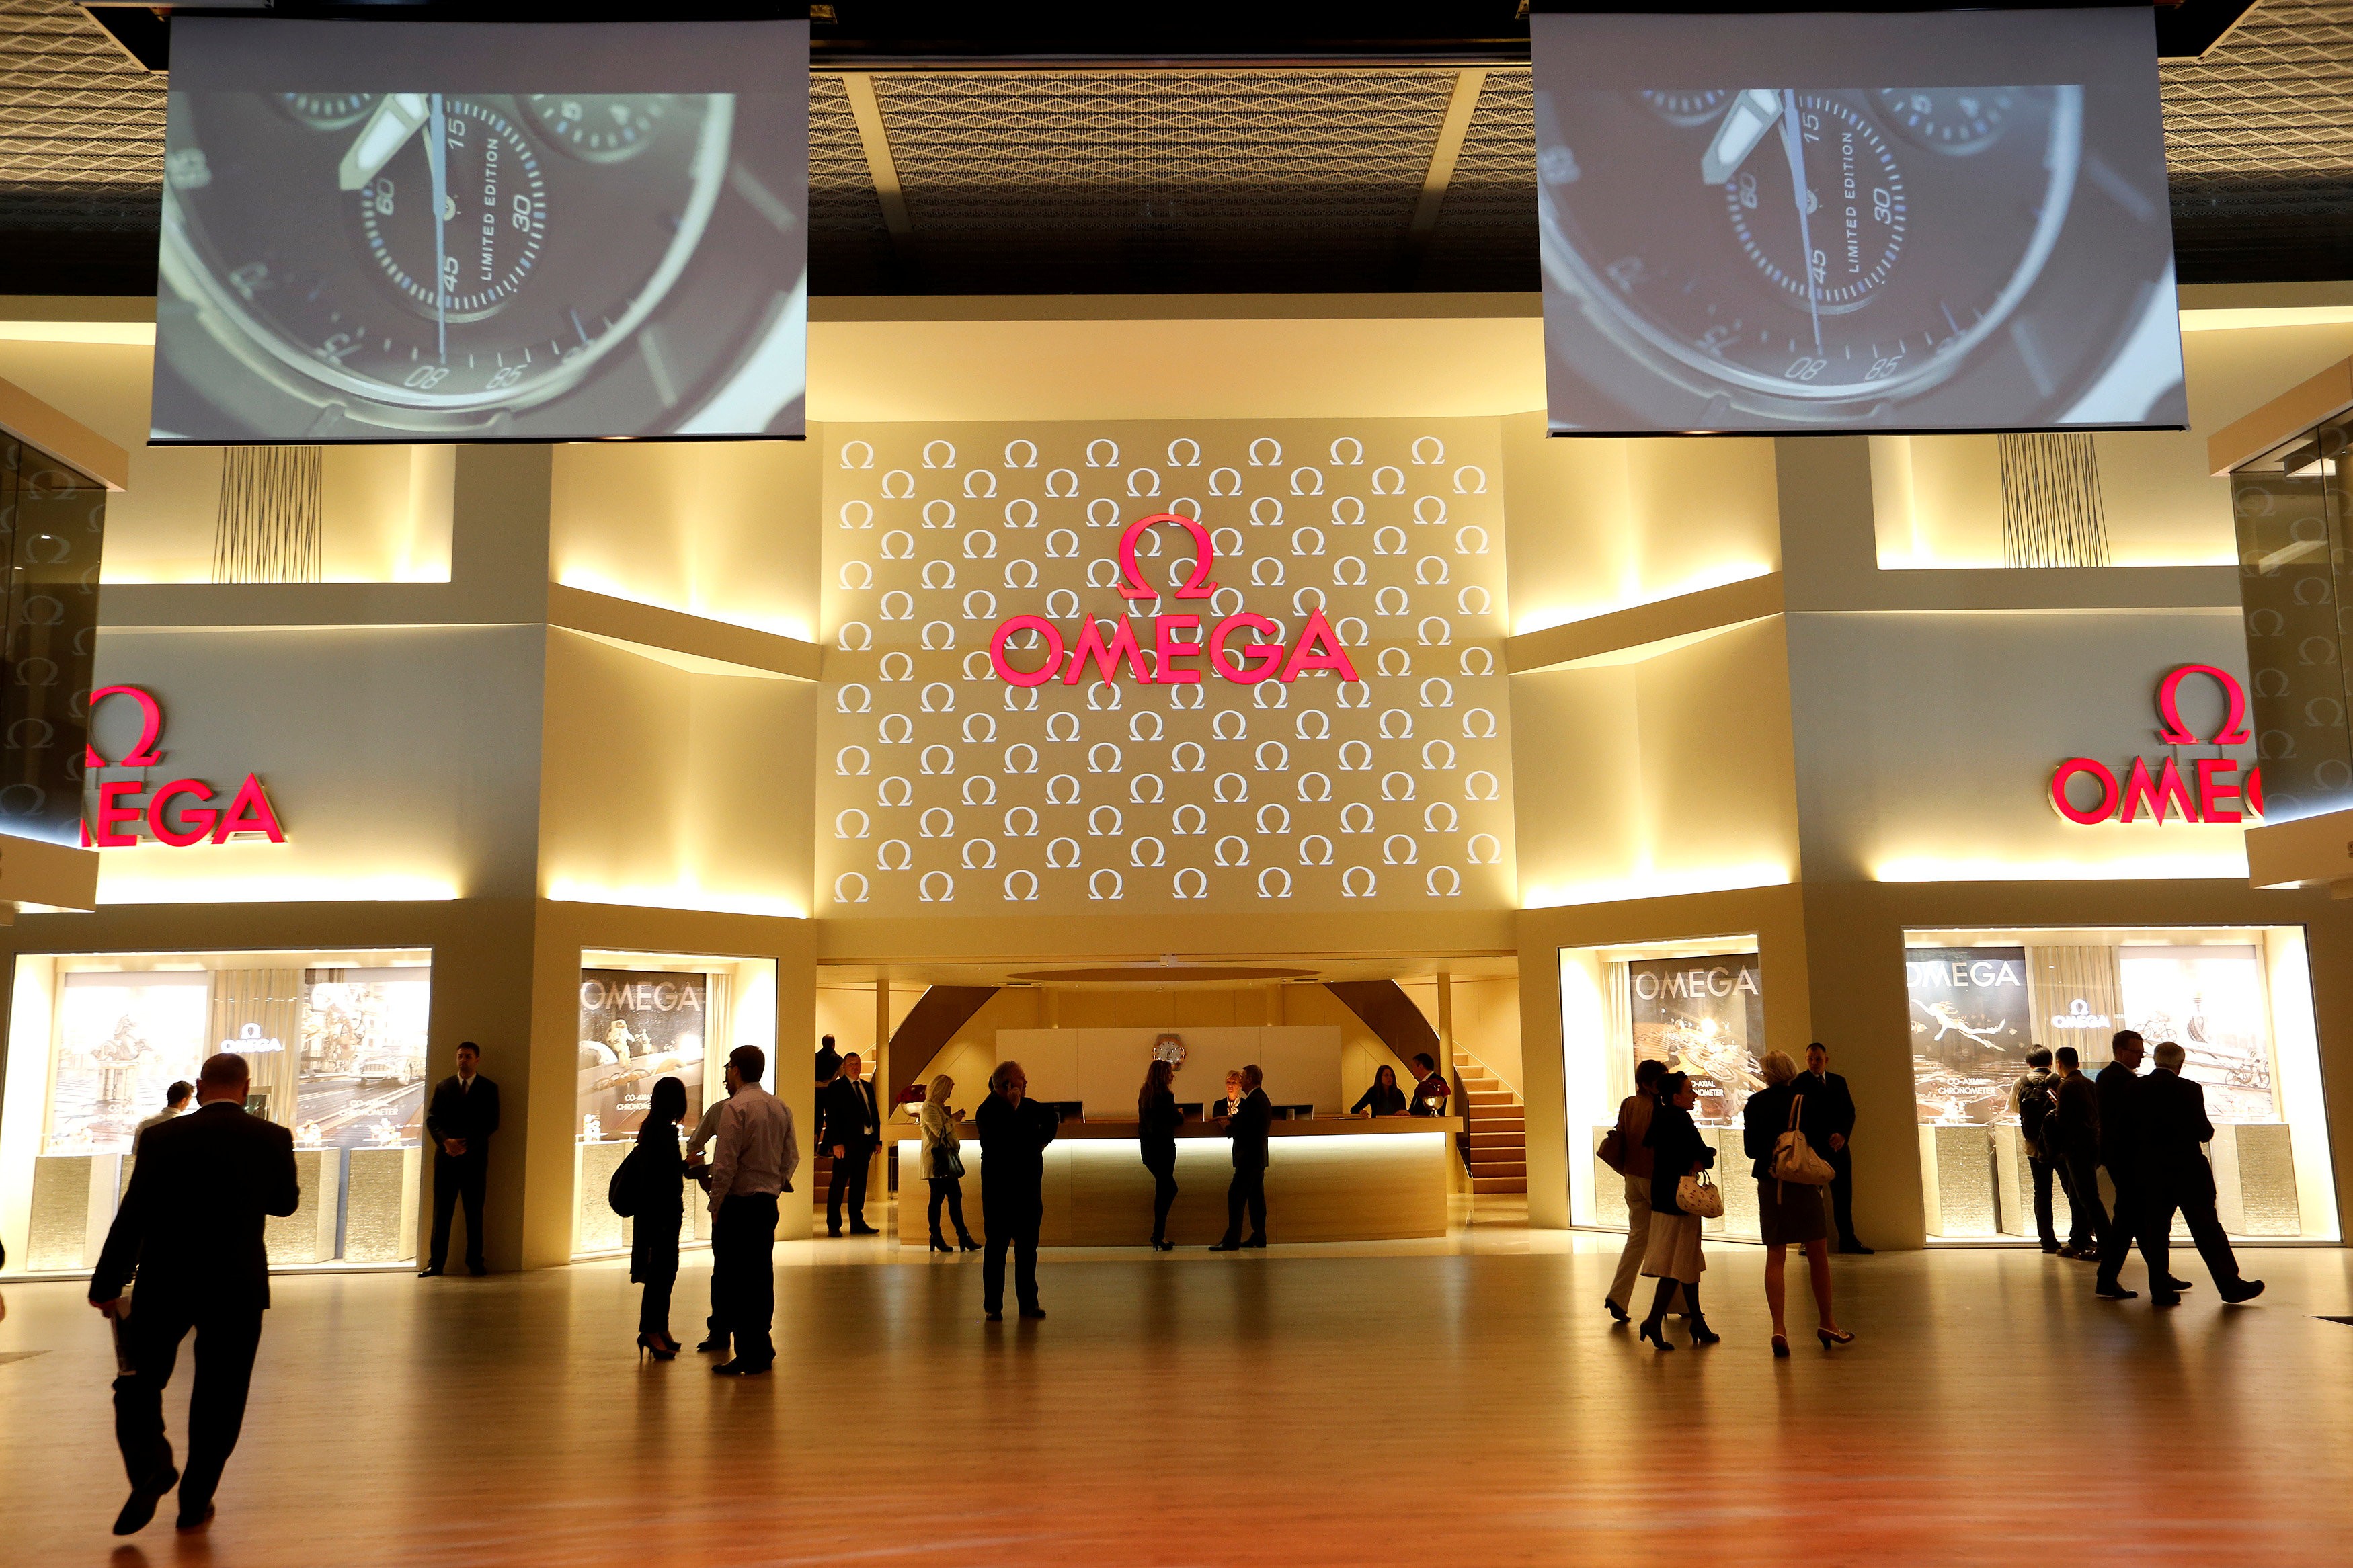 Omega has almost 200 points of sales and 30 shops in more than 90 cities across China. Photo: Reuters